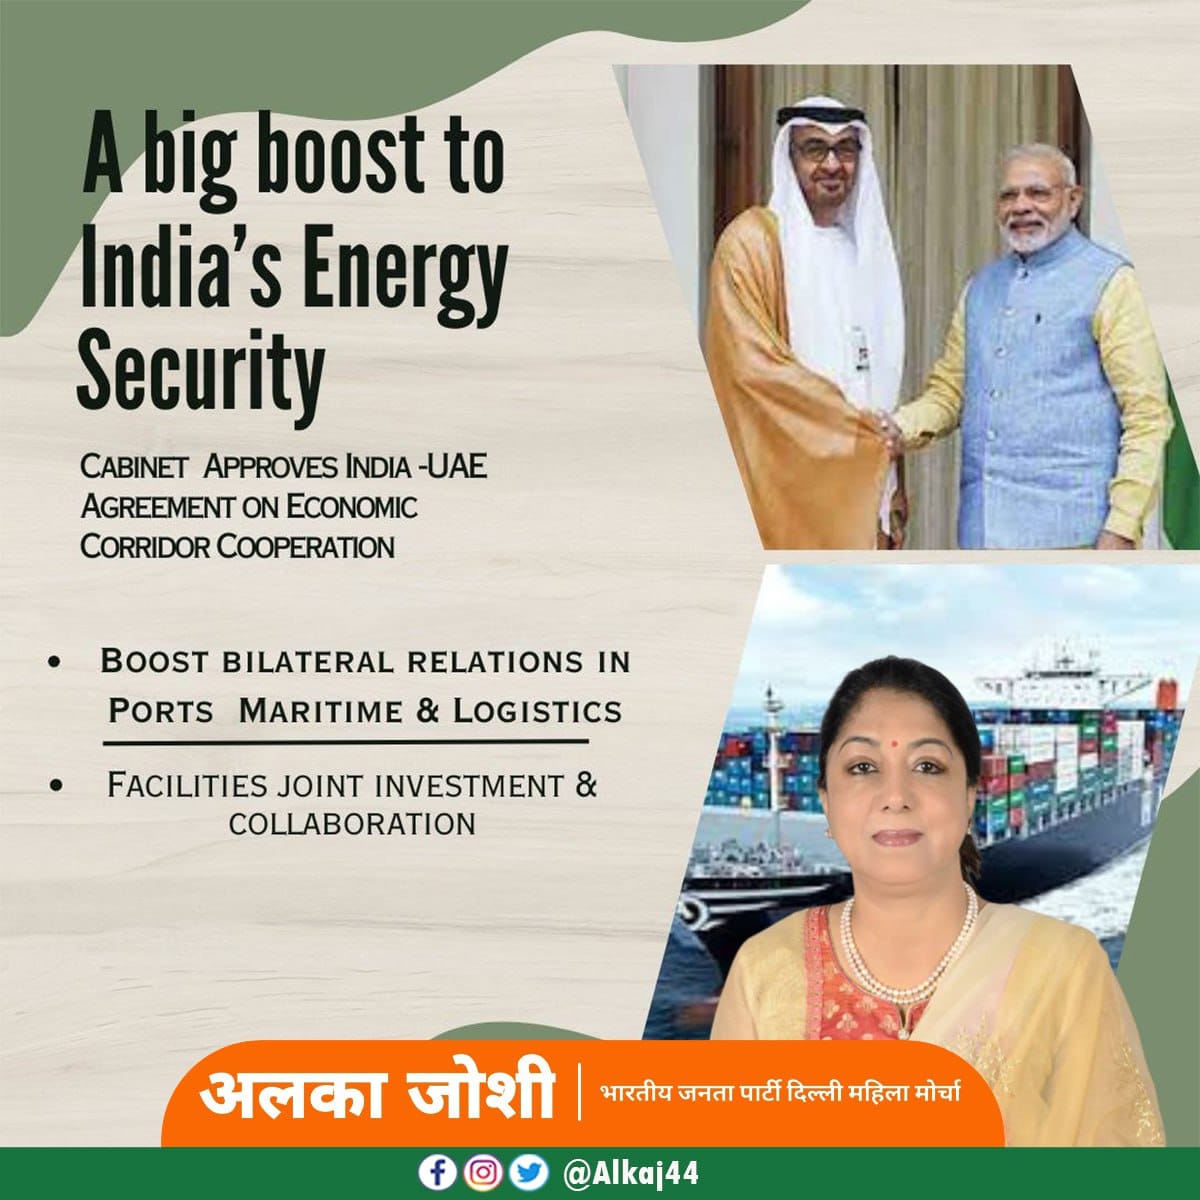 A green light for India's energy security as the Cabinet approves the India-UAE Economic Corridor Agreement. This deal strengthens ties in ports, shipping, and logistics, further opening doors for joint investments and a more secure energy future for India. 
#CabinetDecisions…